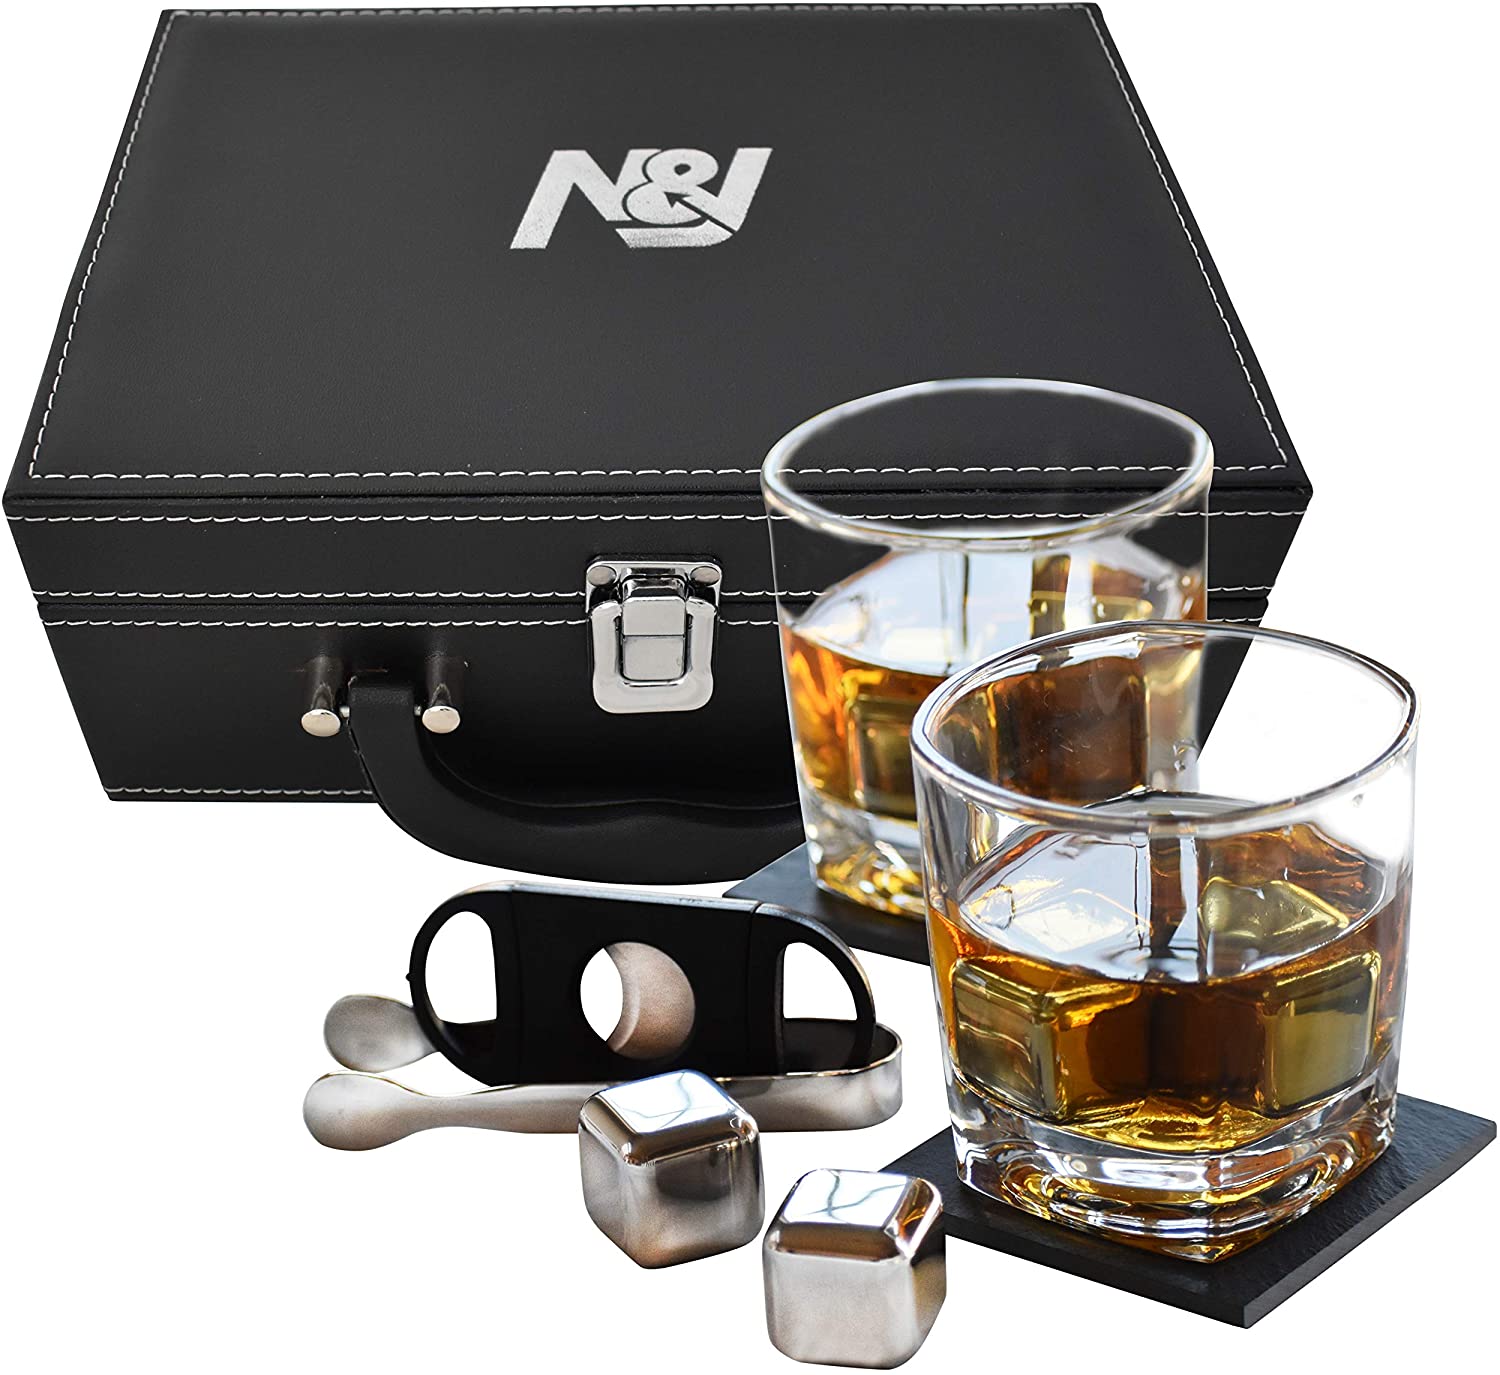 Factory For Whiskey Glass Gift Set - Father’s Day Gift Whisky Glass And Stone Set 2 Large Square Whiskey Glasses stainless steel Whisky Rocks Chilling Stones In Leather Box – Shunstone